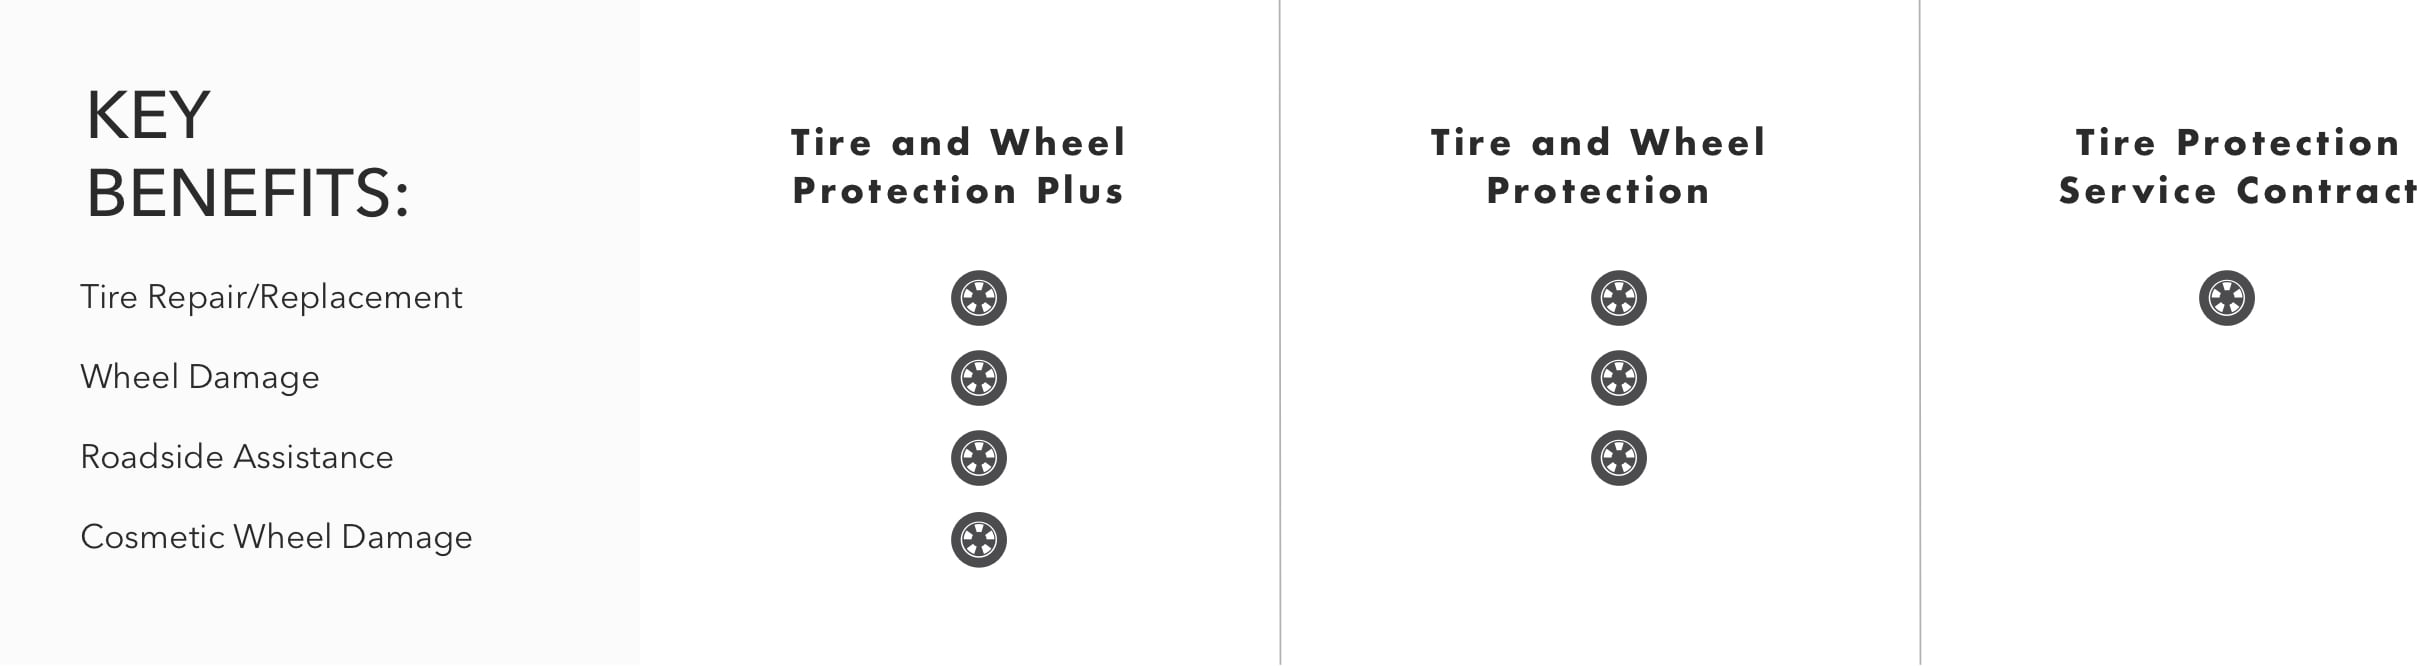 Buick Protection Tire and Wheel Key Benefit Comparison Chart